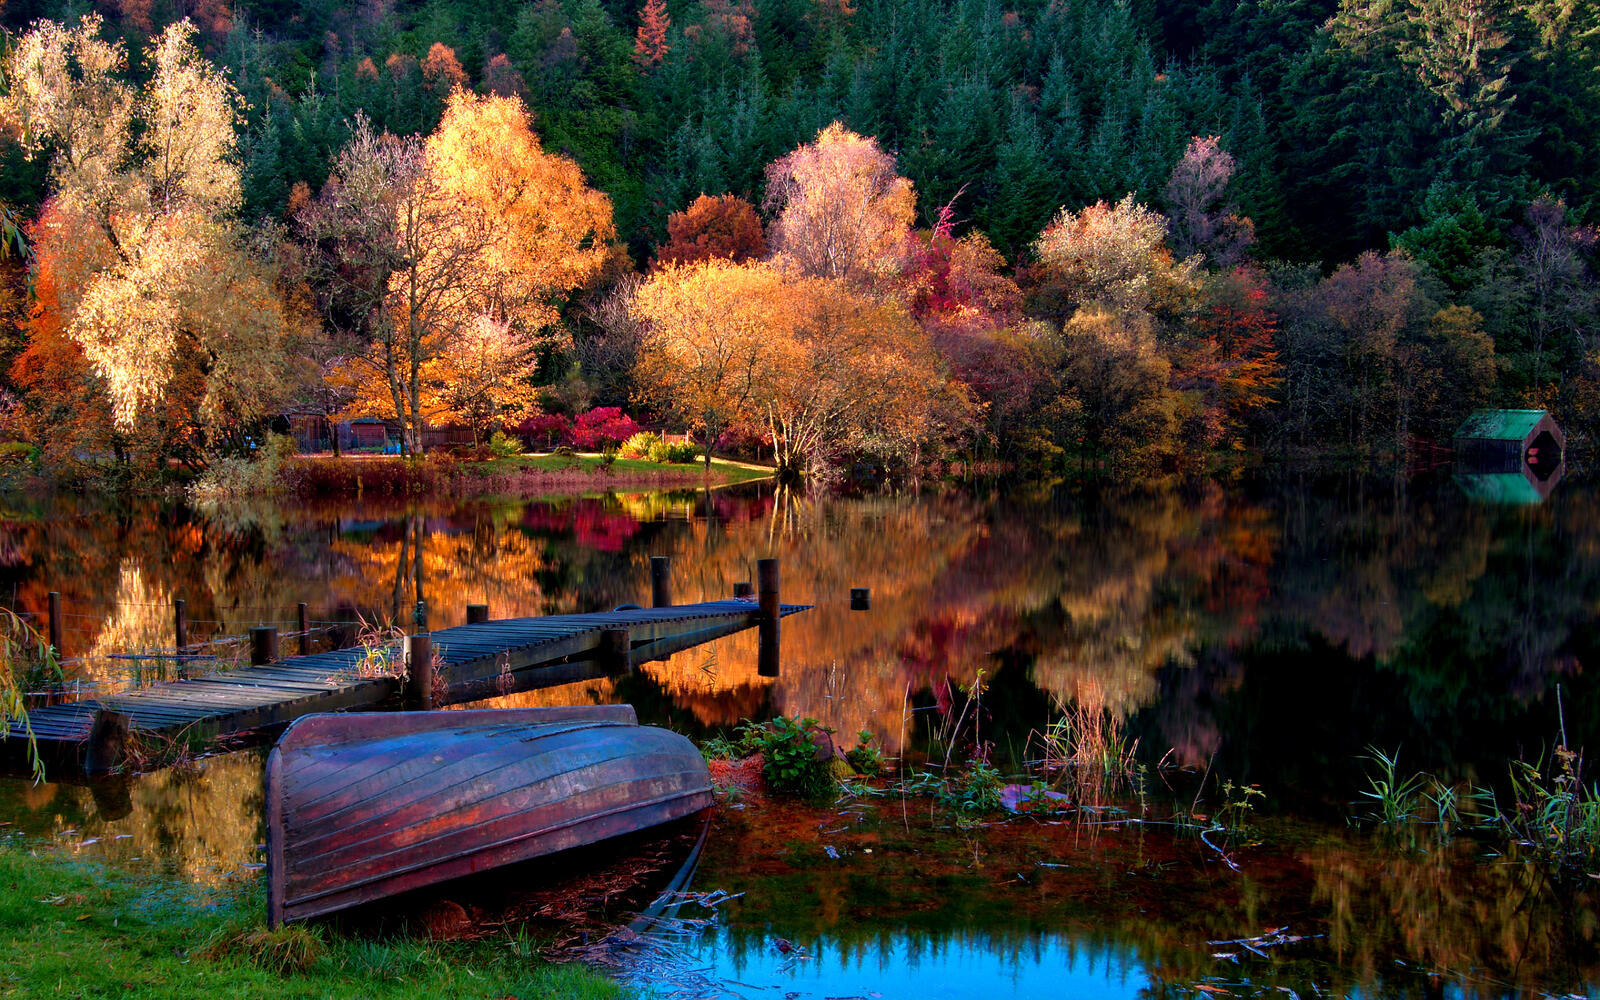 An overturned boat on the shore of a lake in the fall woods